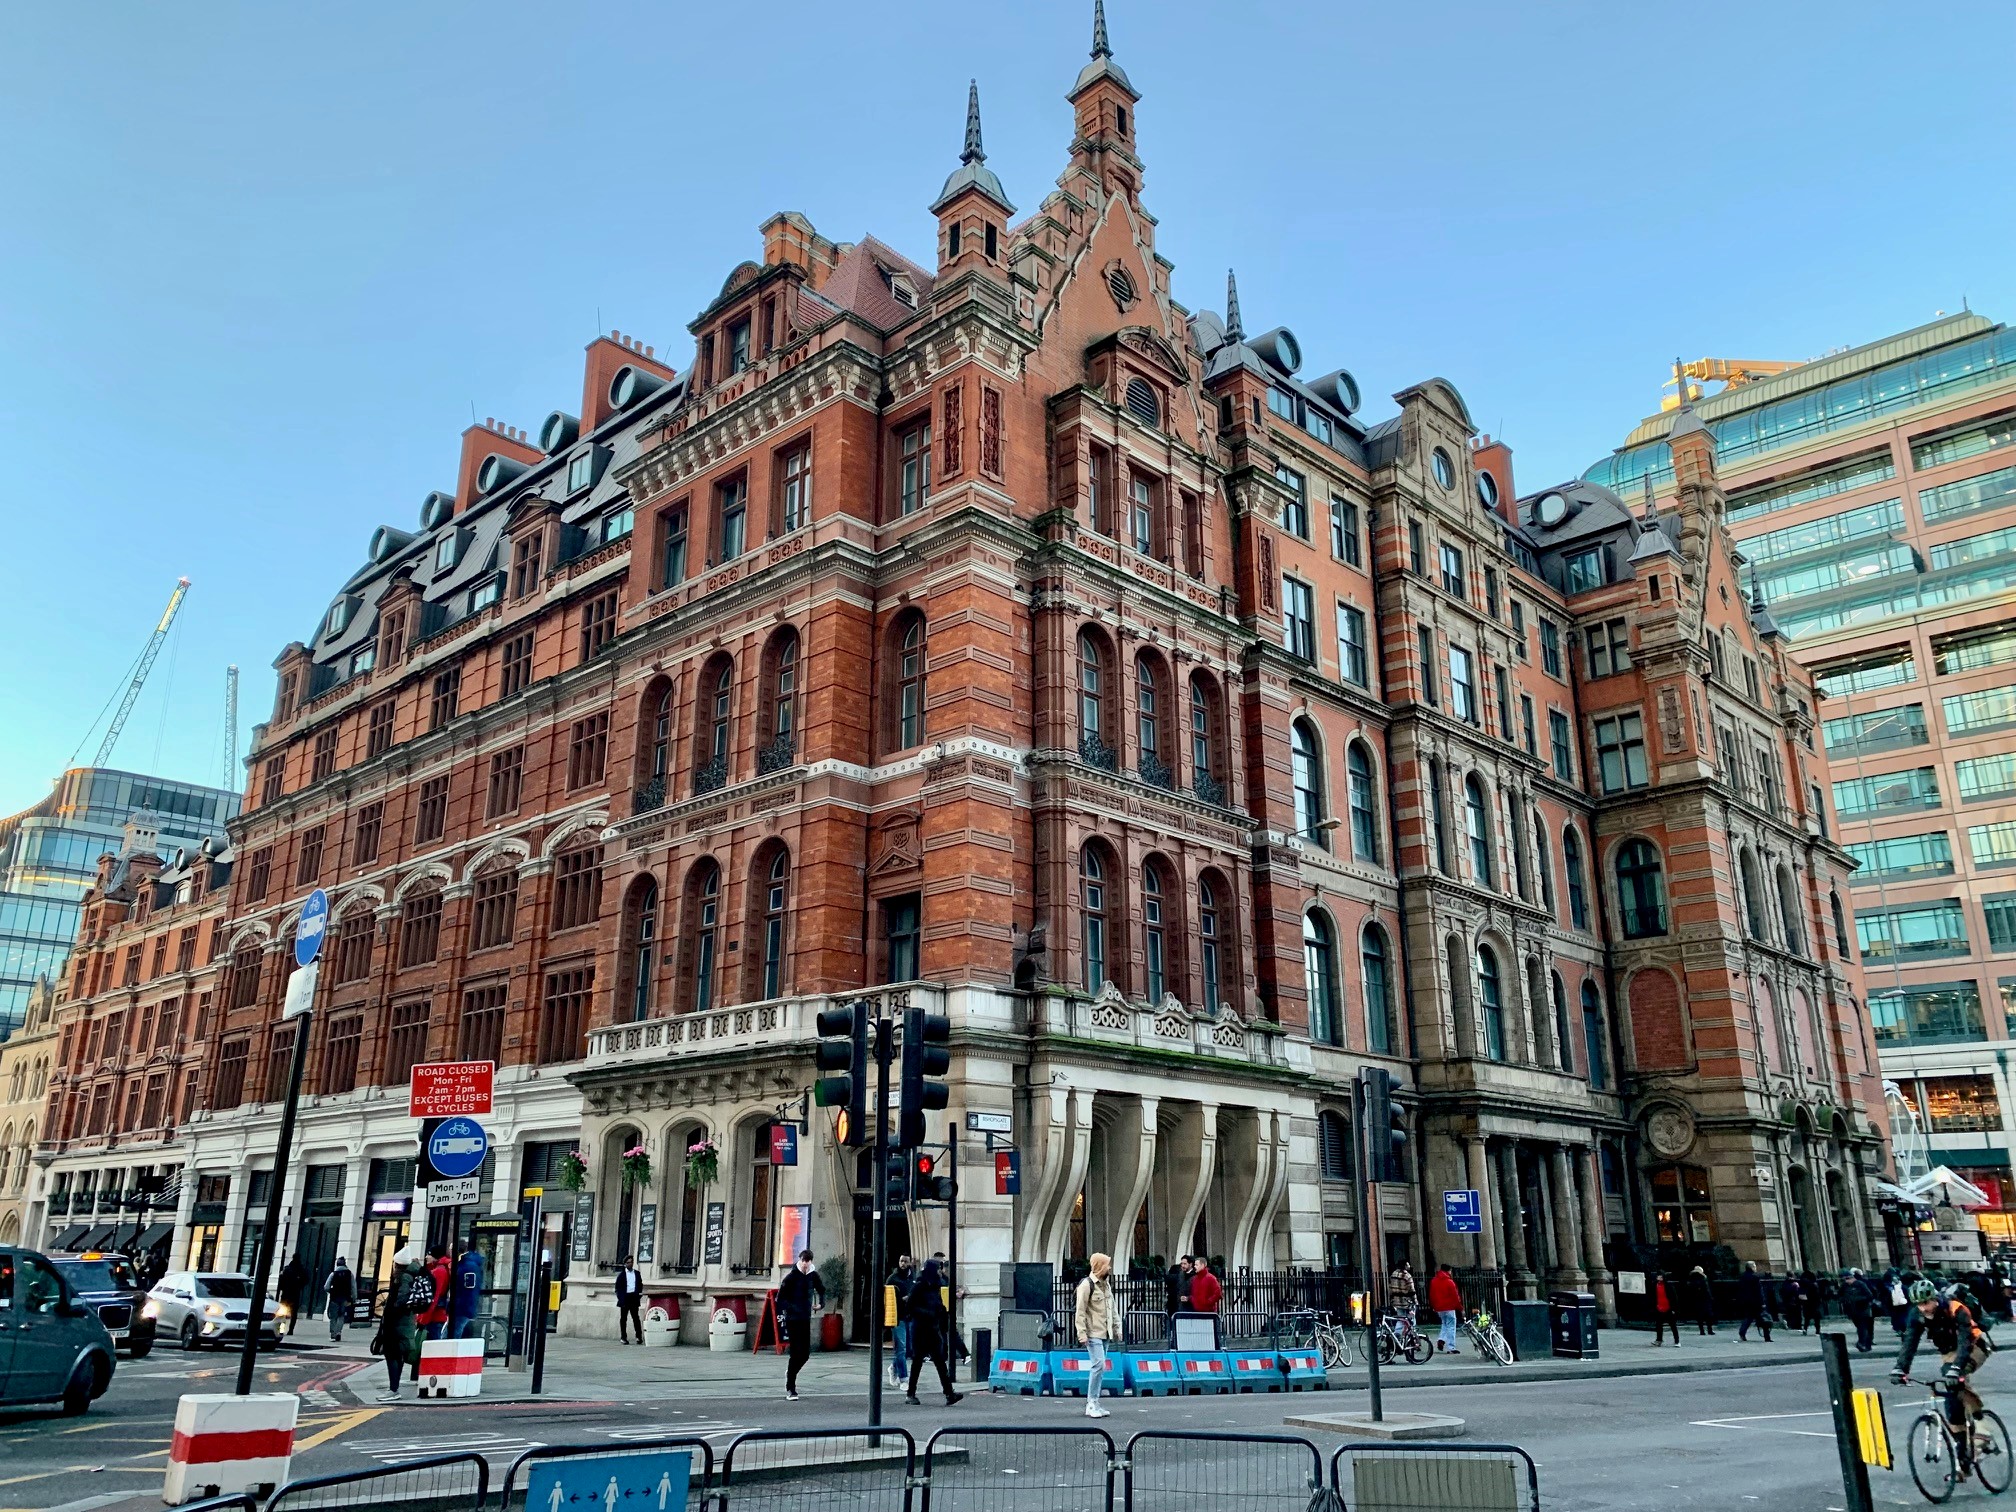 Grade II listed Liverpool Street Station and Grade II* listed former Great Eastern Hotel, now the Andaz London Liverpool Street Hotel.